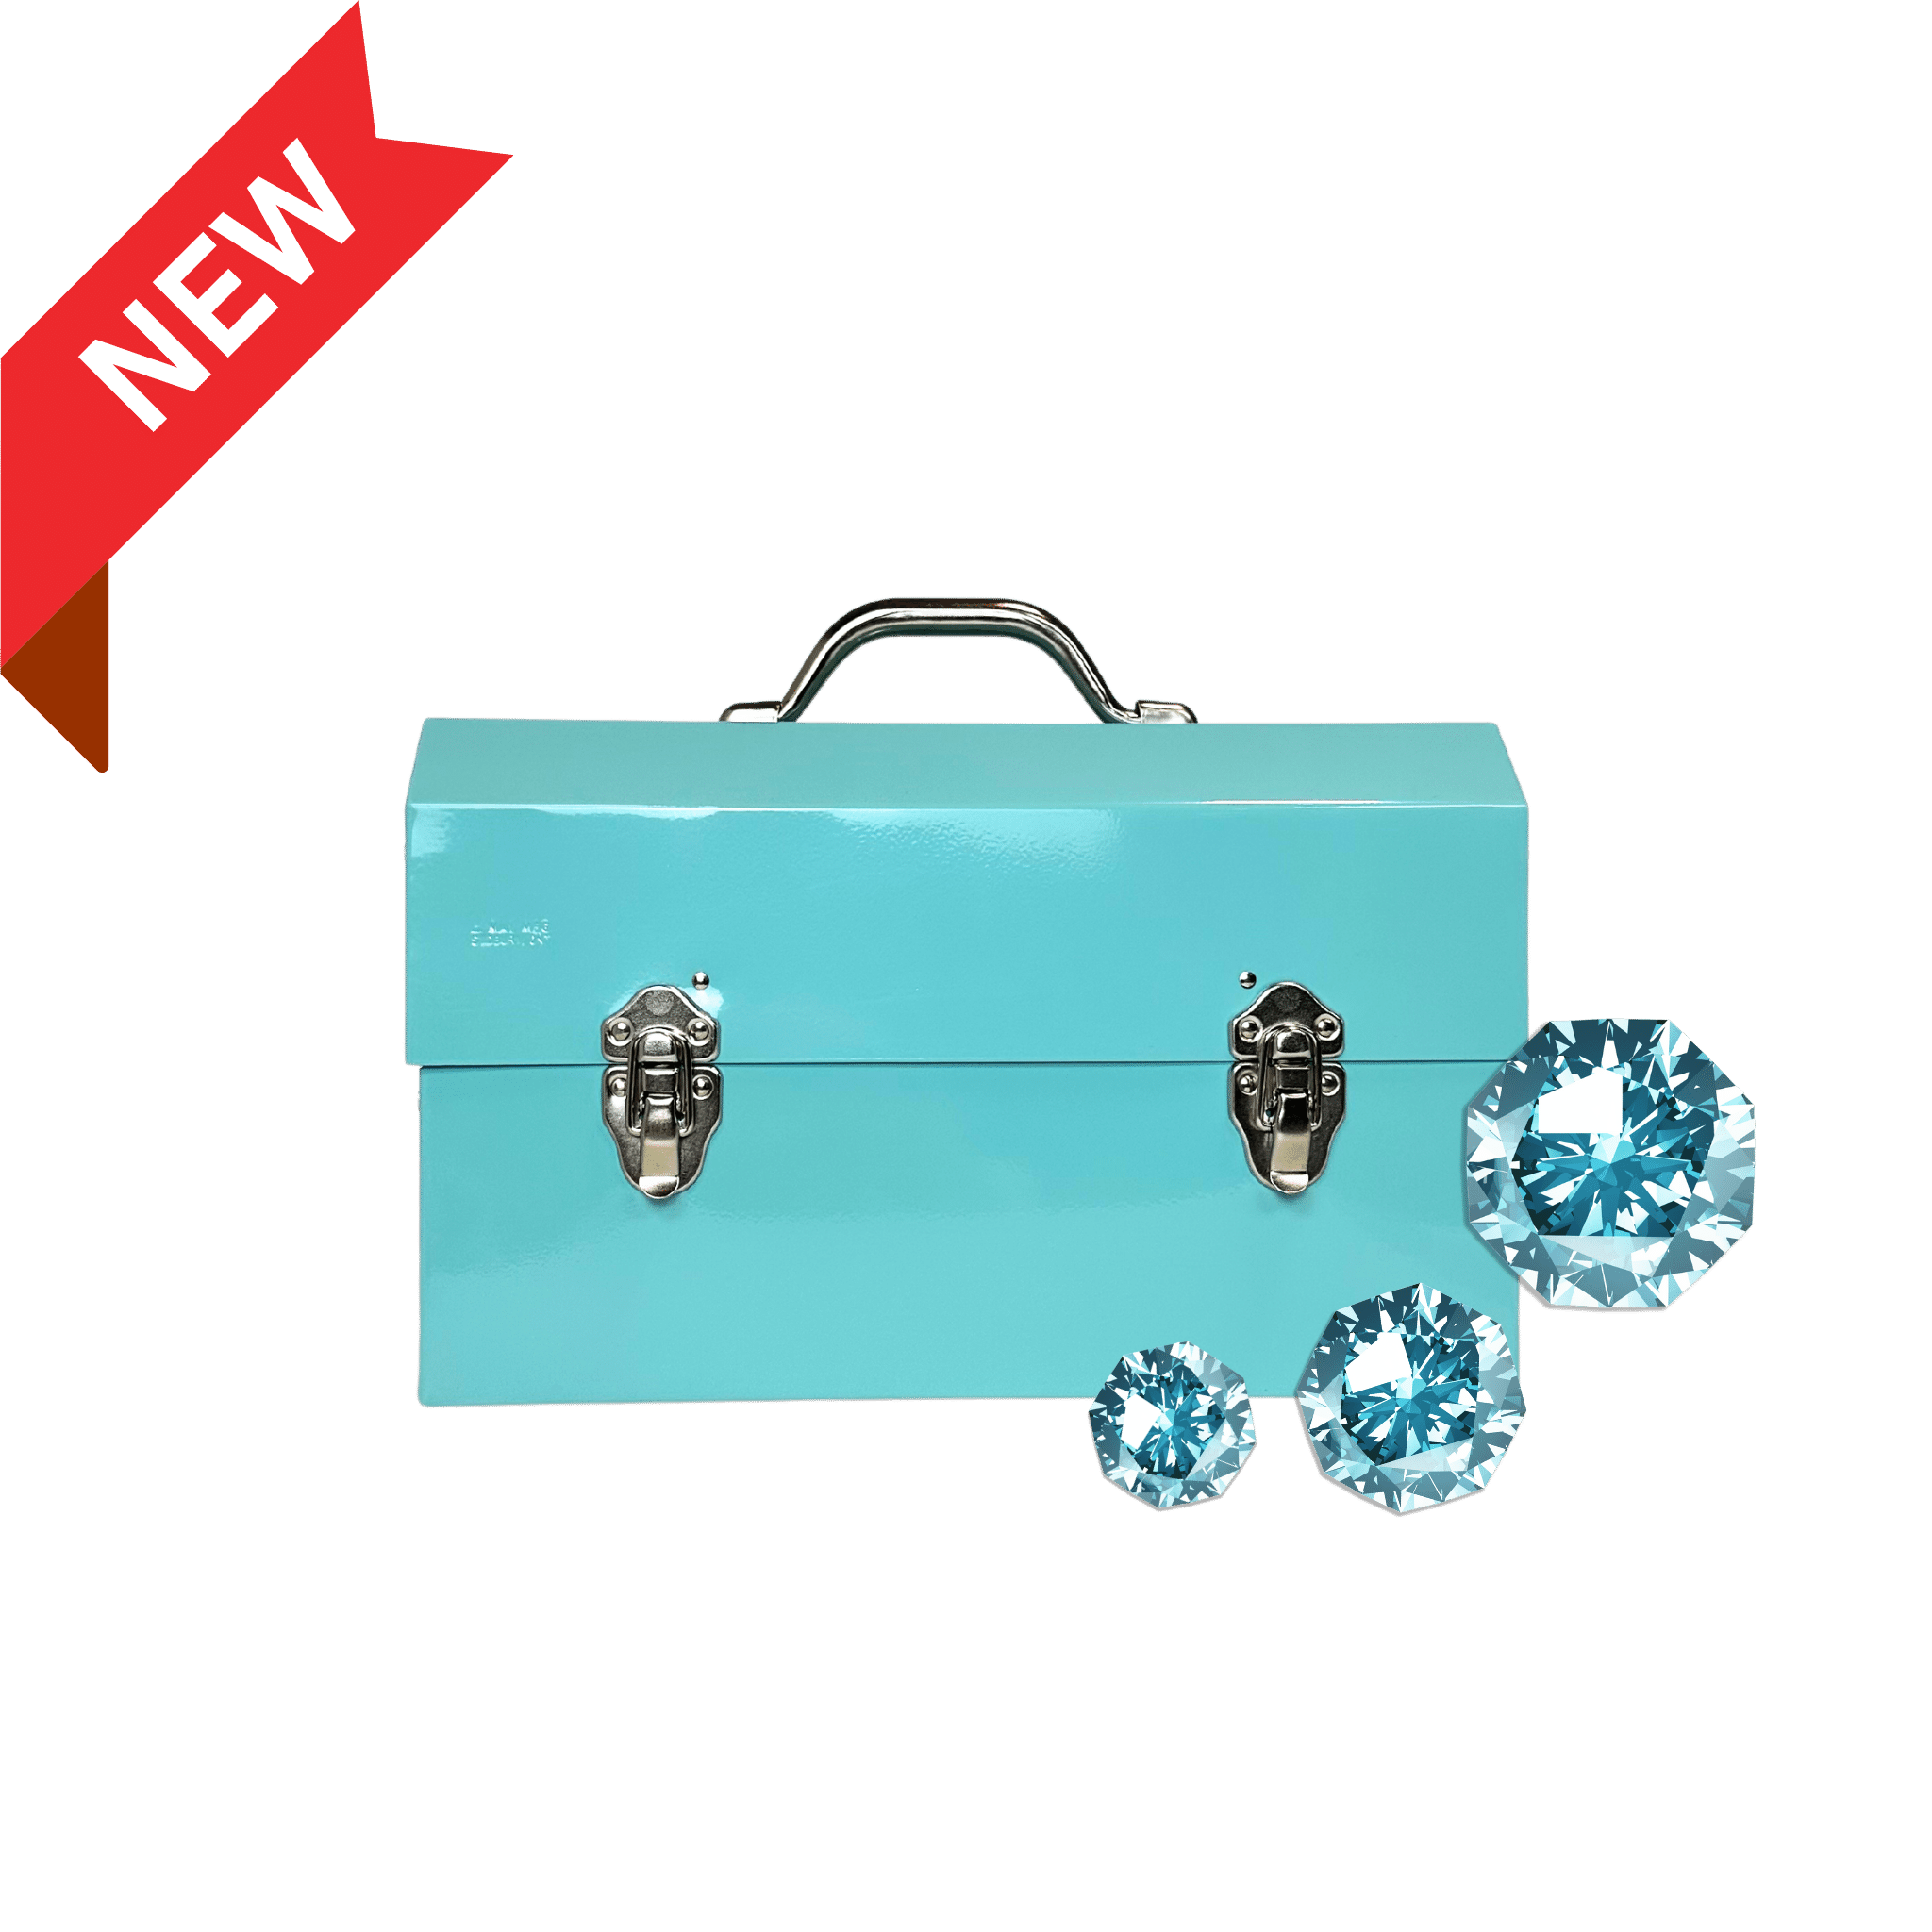 L. May aluminum lunchbox powder coated in teal for the gemstone aquamarine collection